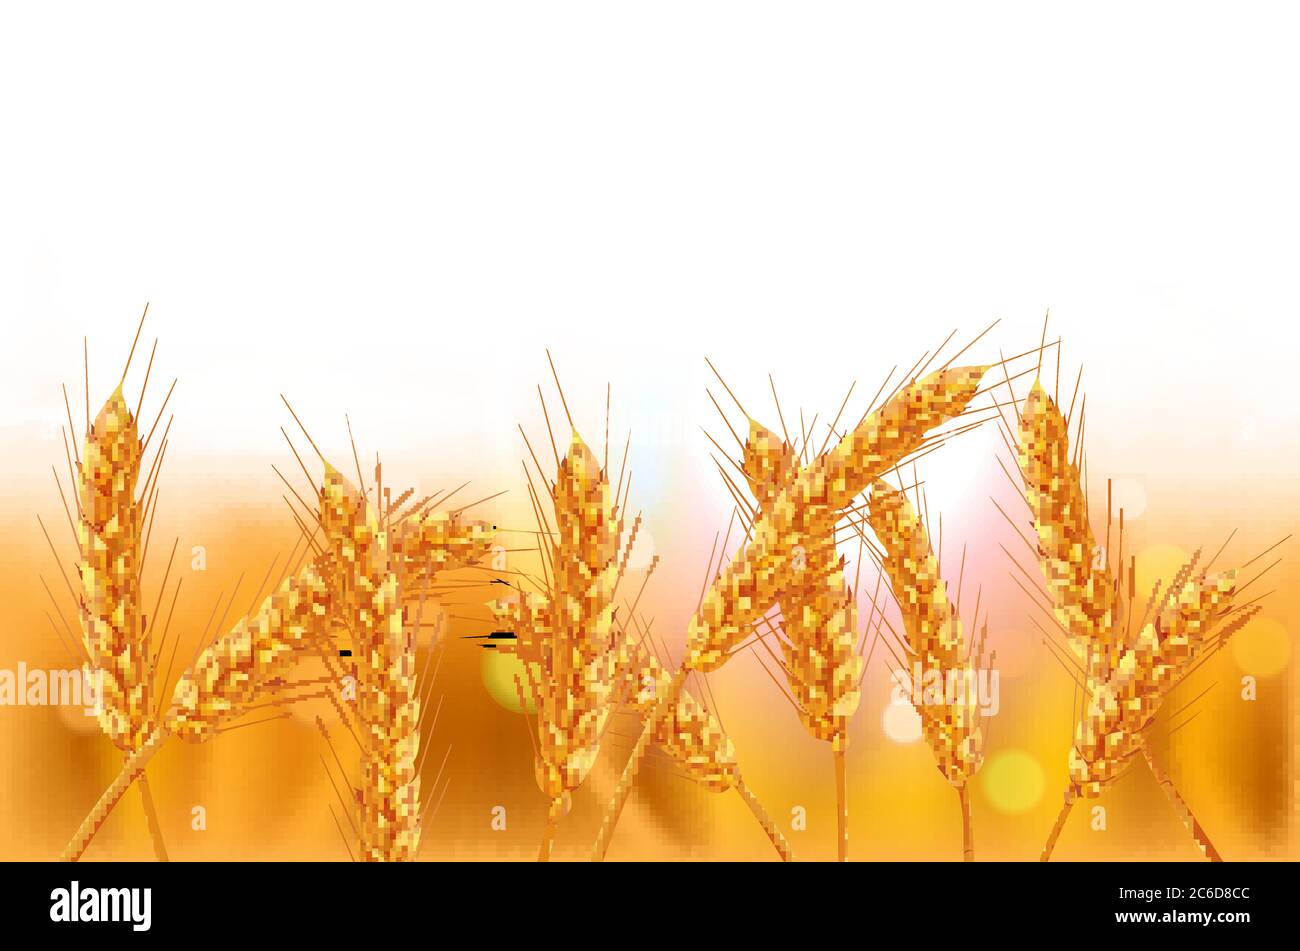 Ears of wheat in vector 3D realistic illustration. Ripe grain clipart for packaging design: bread, beer, kvass, pastries. Stock Vector